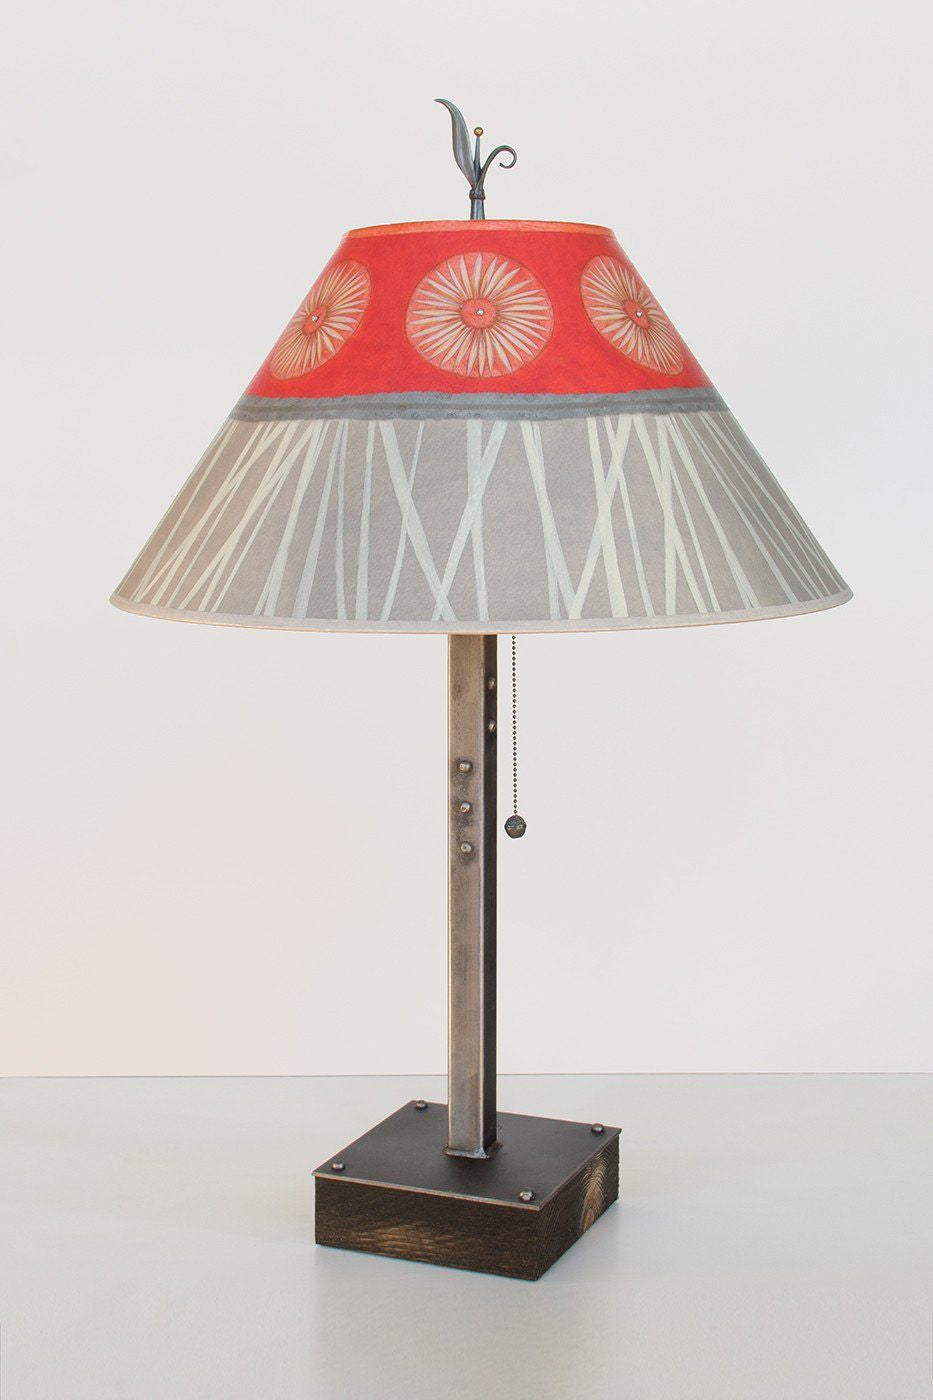 Janna Ugone & Co Table Lamps Steel Table Lamp on Wood with Large Conical Shade in Tang